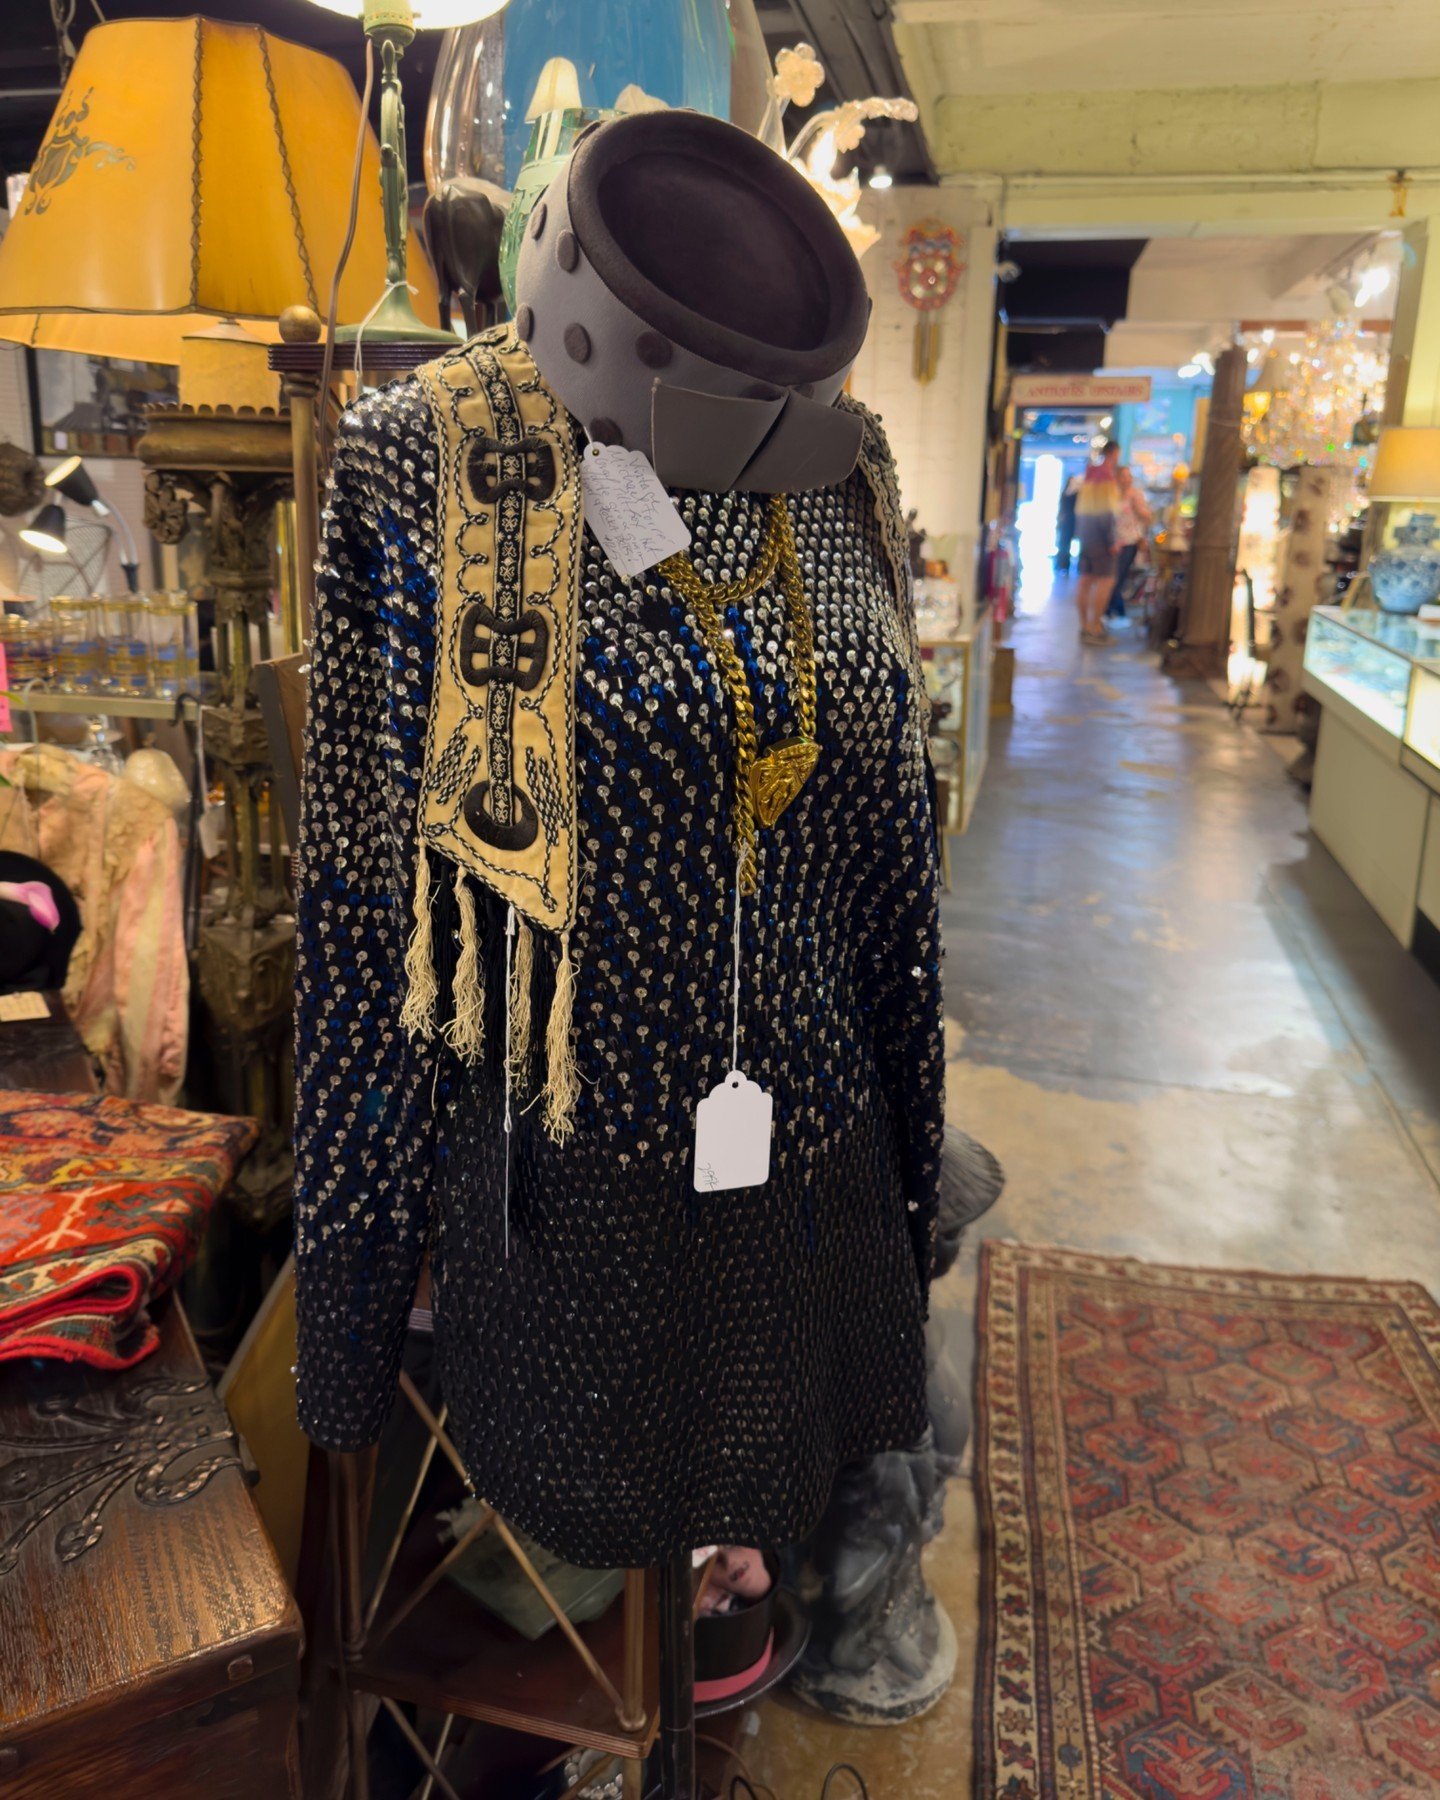 When you shop for #VintageClothes you reduce landfill waste, put an end to the #FastFashion cycle, and look good doing it! ♻️ Come by every day between 10am-6pm to browse what&rsquo;s new from our 100+ vendors.⠀
⠀
#ShopVintage #AntiqueStore #Pasadena